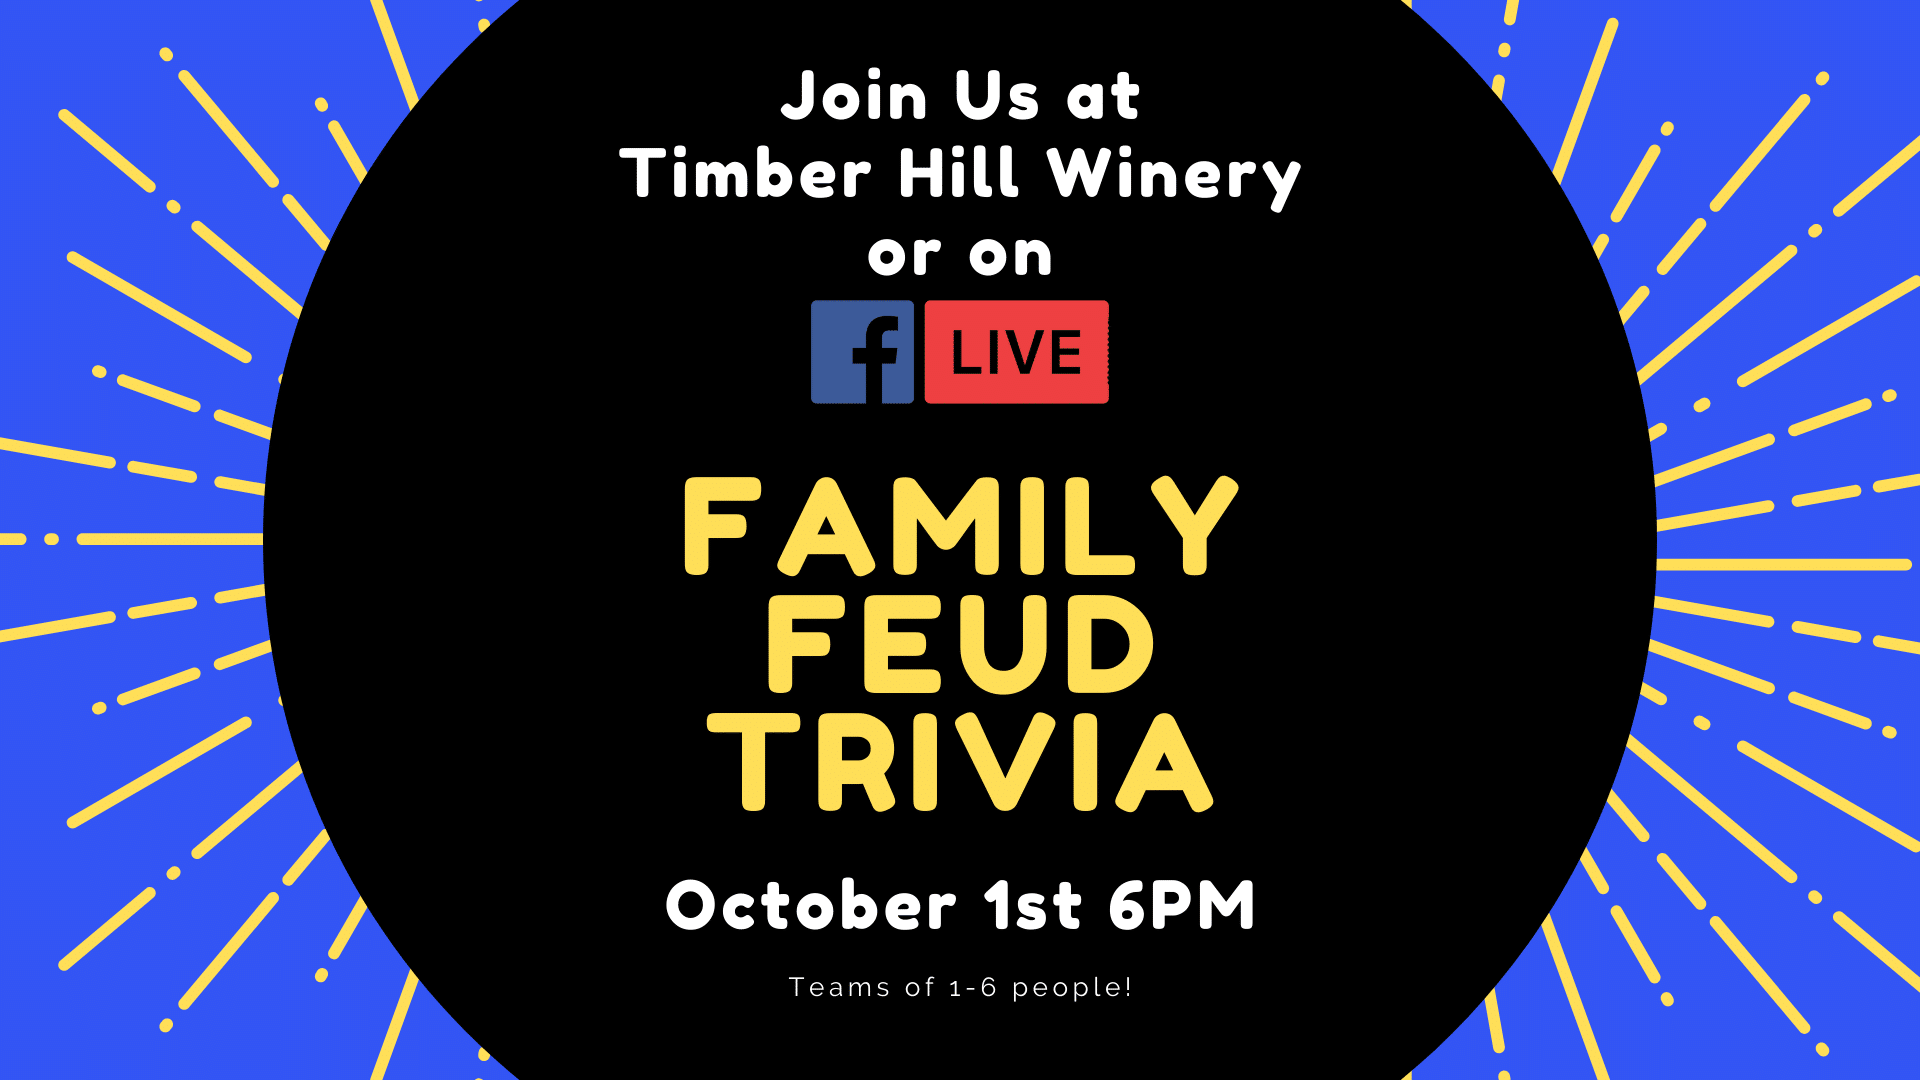 Family Feud Trivia at Timber Hill Winery